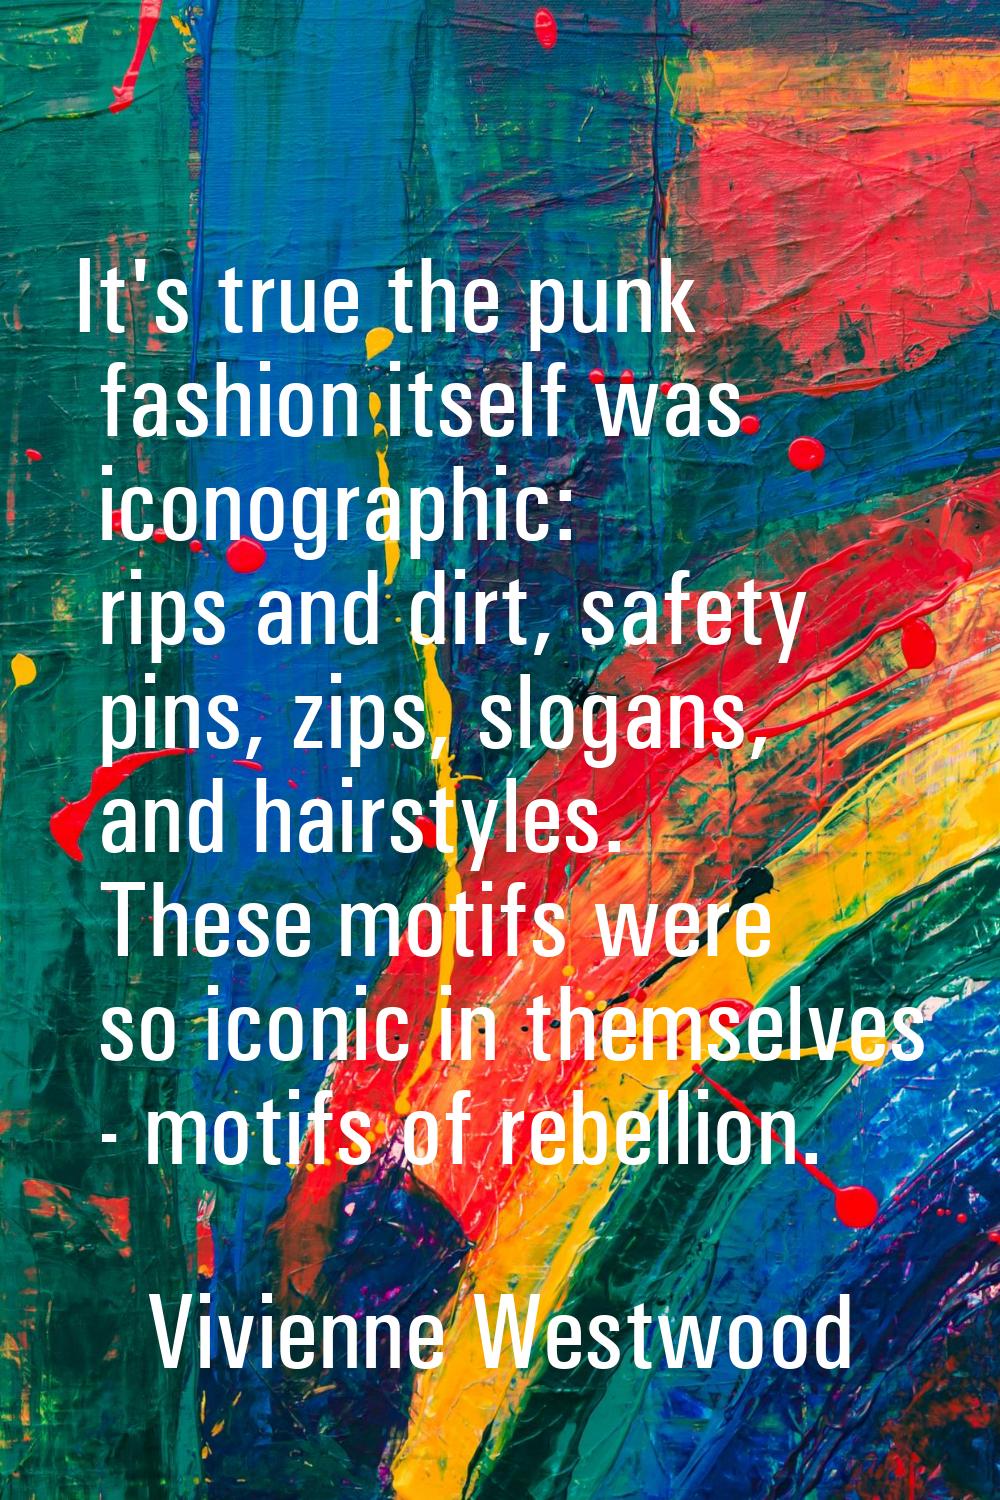 It's true the punk fashion itself was iconographic: rips and dirt, safety pins, zips, slogans, and 